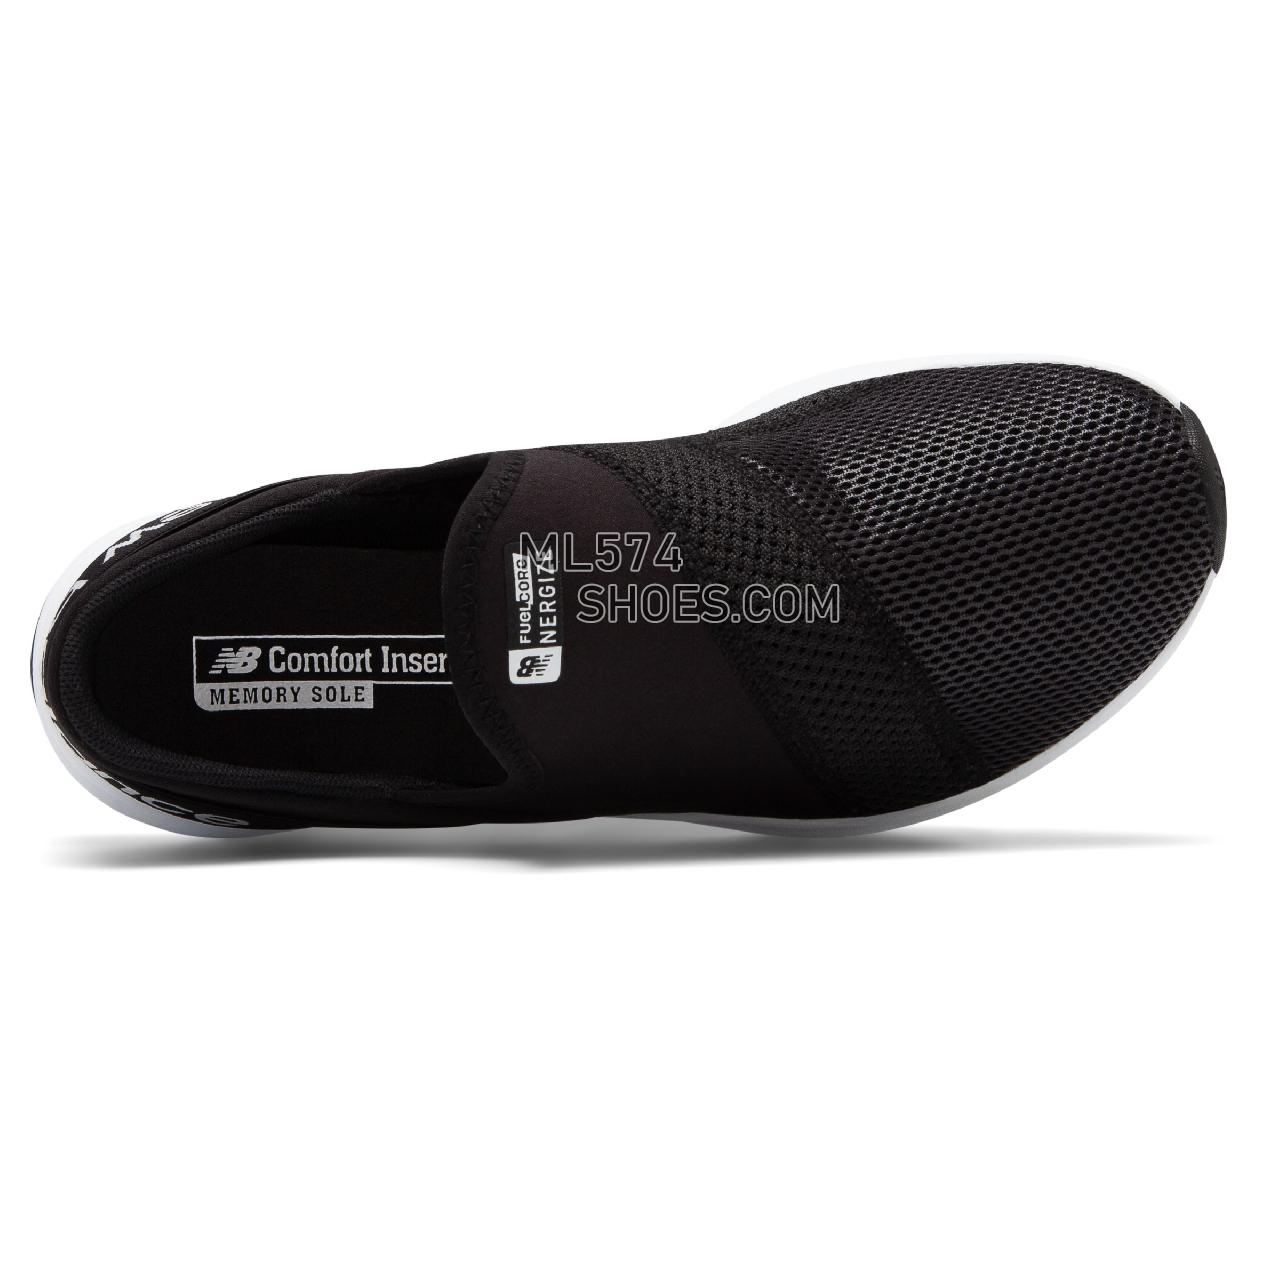 New Balance FuelCore Nergize Easy Slip-On - Women's Sport Style Sneakers - Black with White - WLNRSLB1